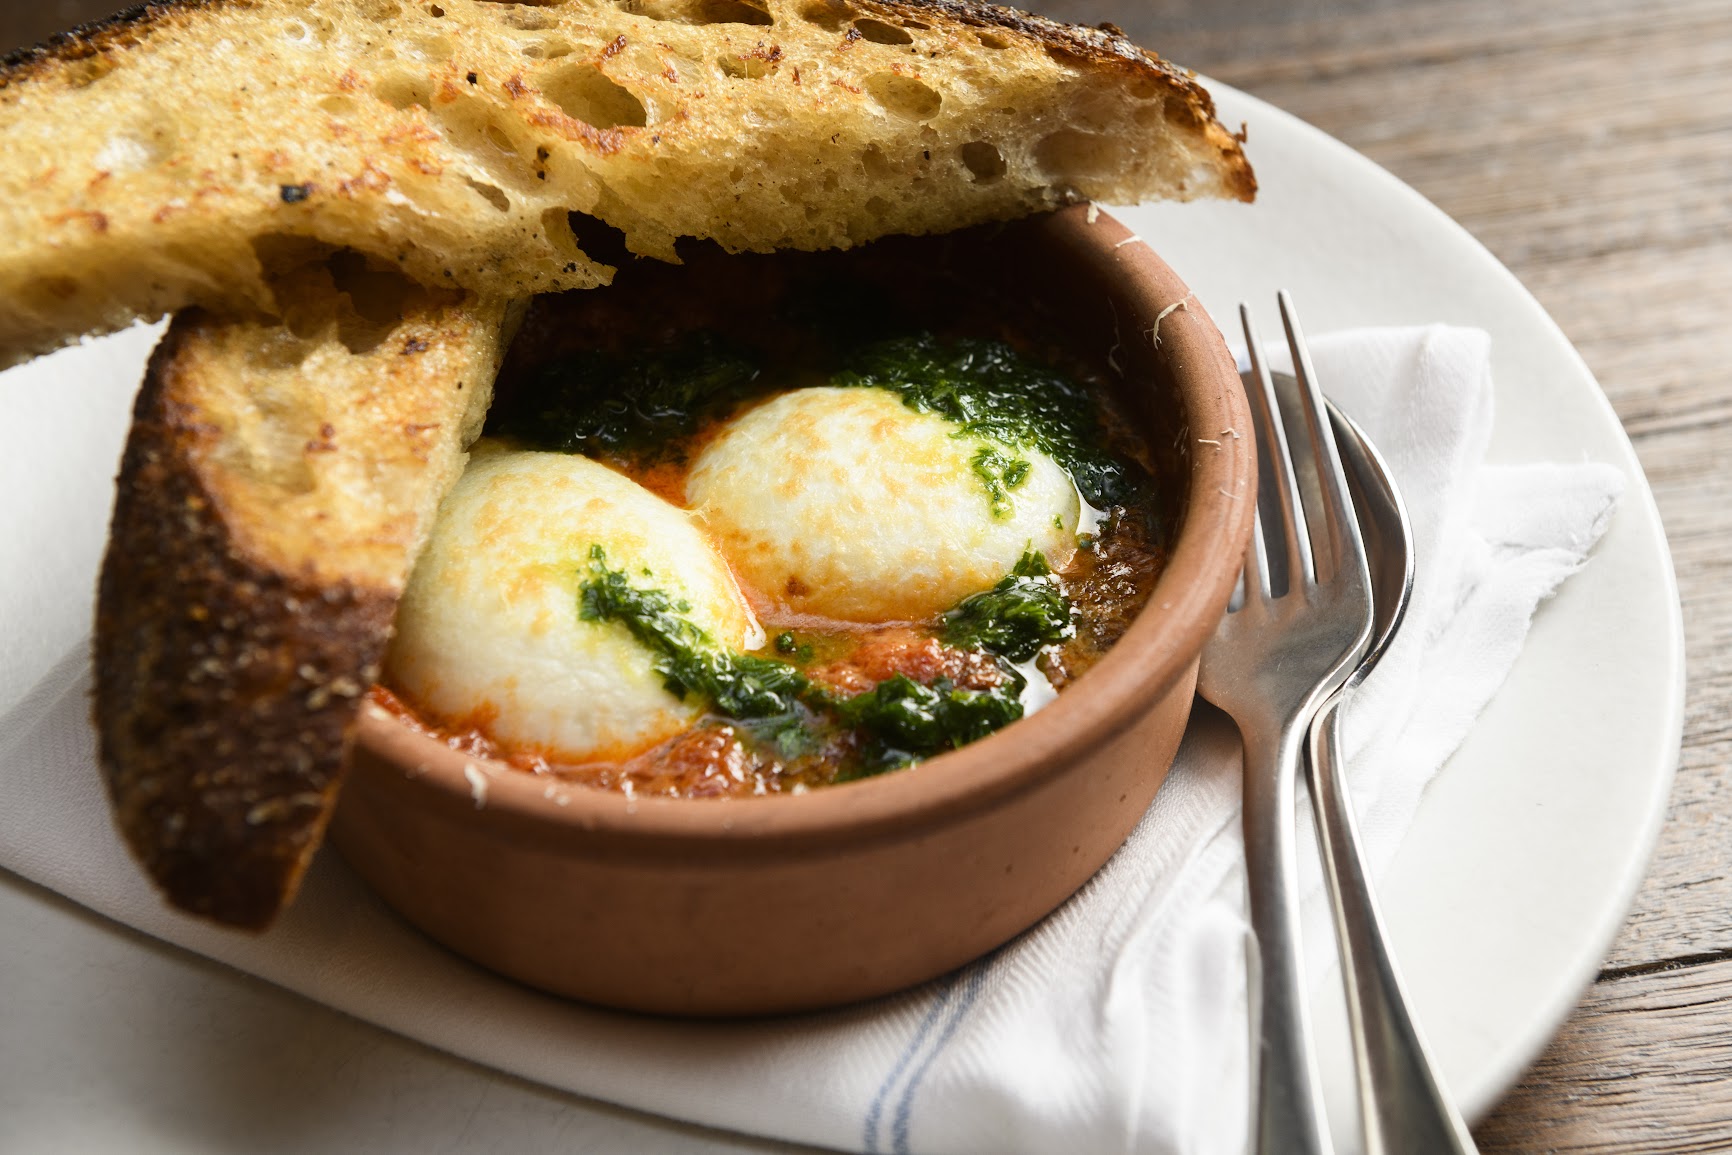 Baked eggs, spicy pomodoro, guanciale, pecorino and garlic bread… oh my!